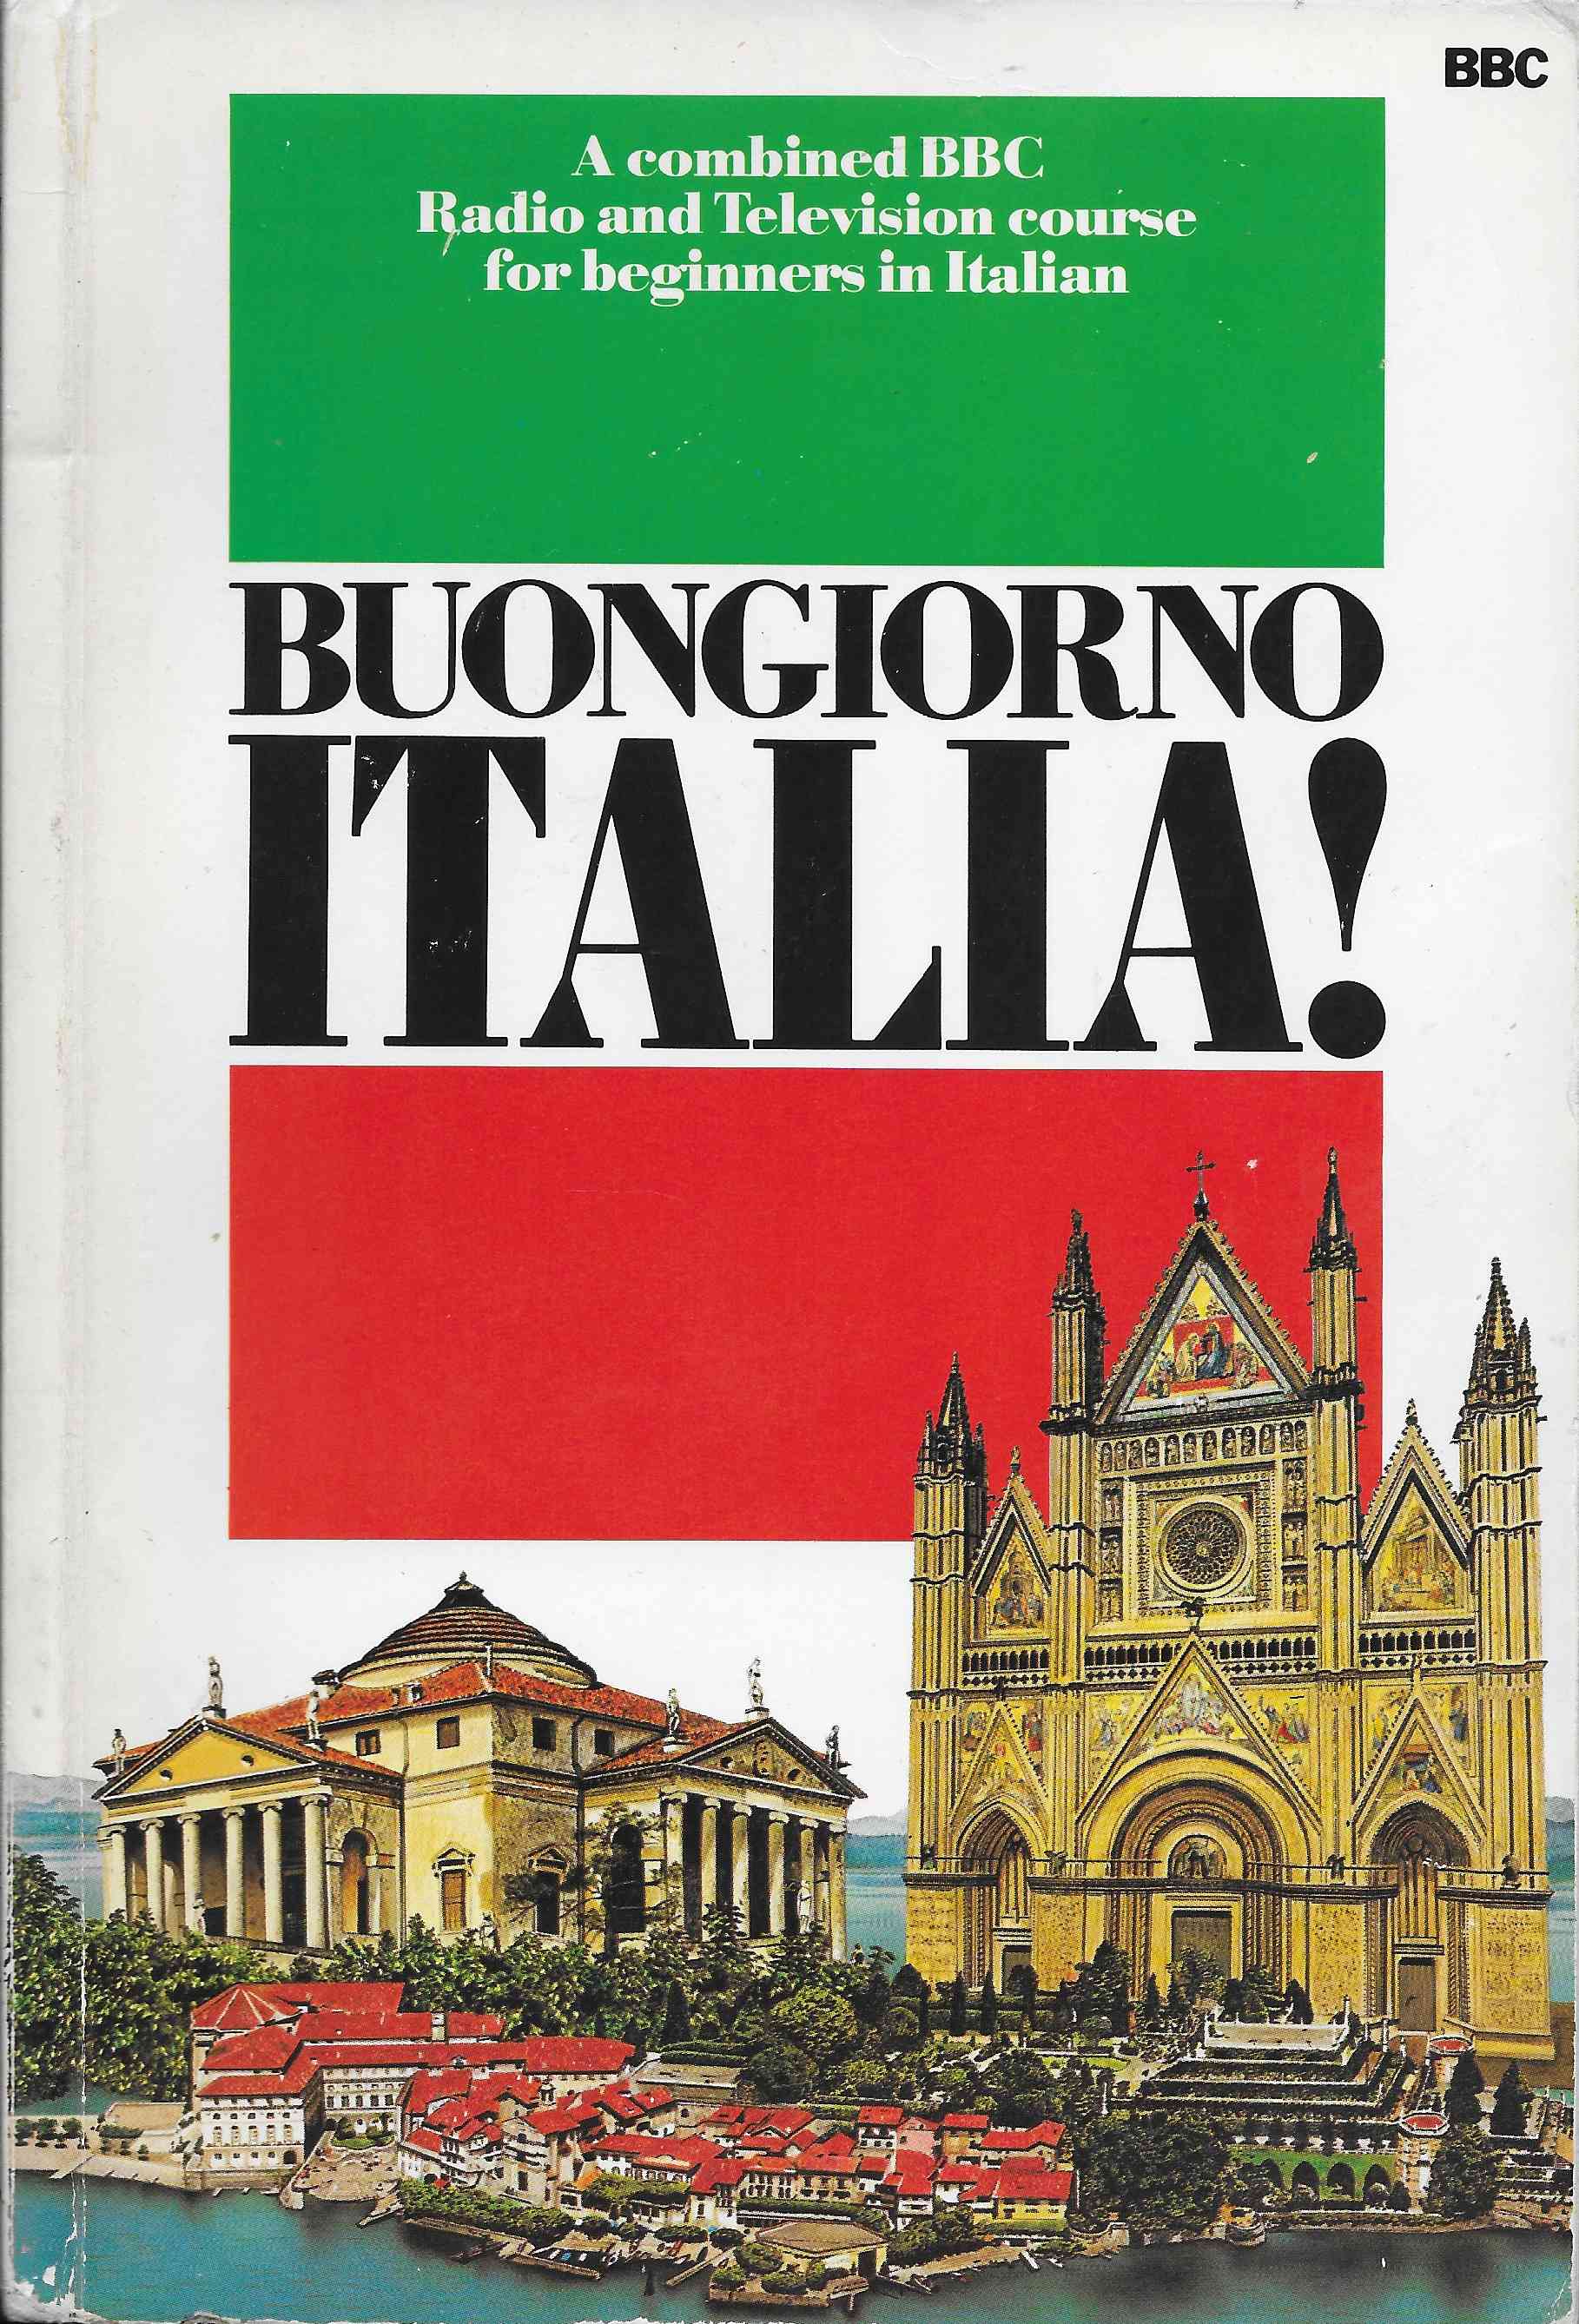 Picture of ISBN 0-563-16479-4 Buongiorno Italia! A combined BBC Radio and Television course for beginners in Italian by artist Unknown from the BBC books - Records and Tapes library